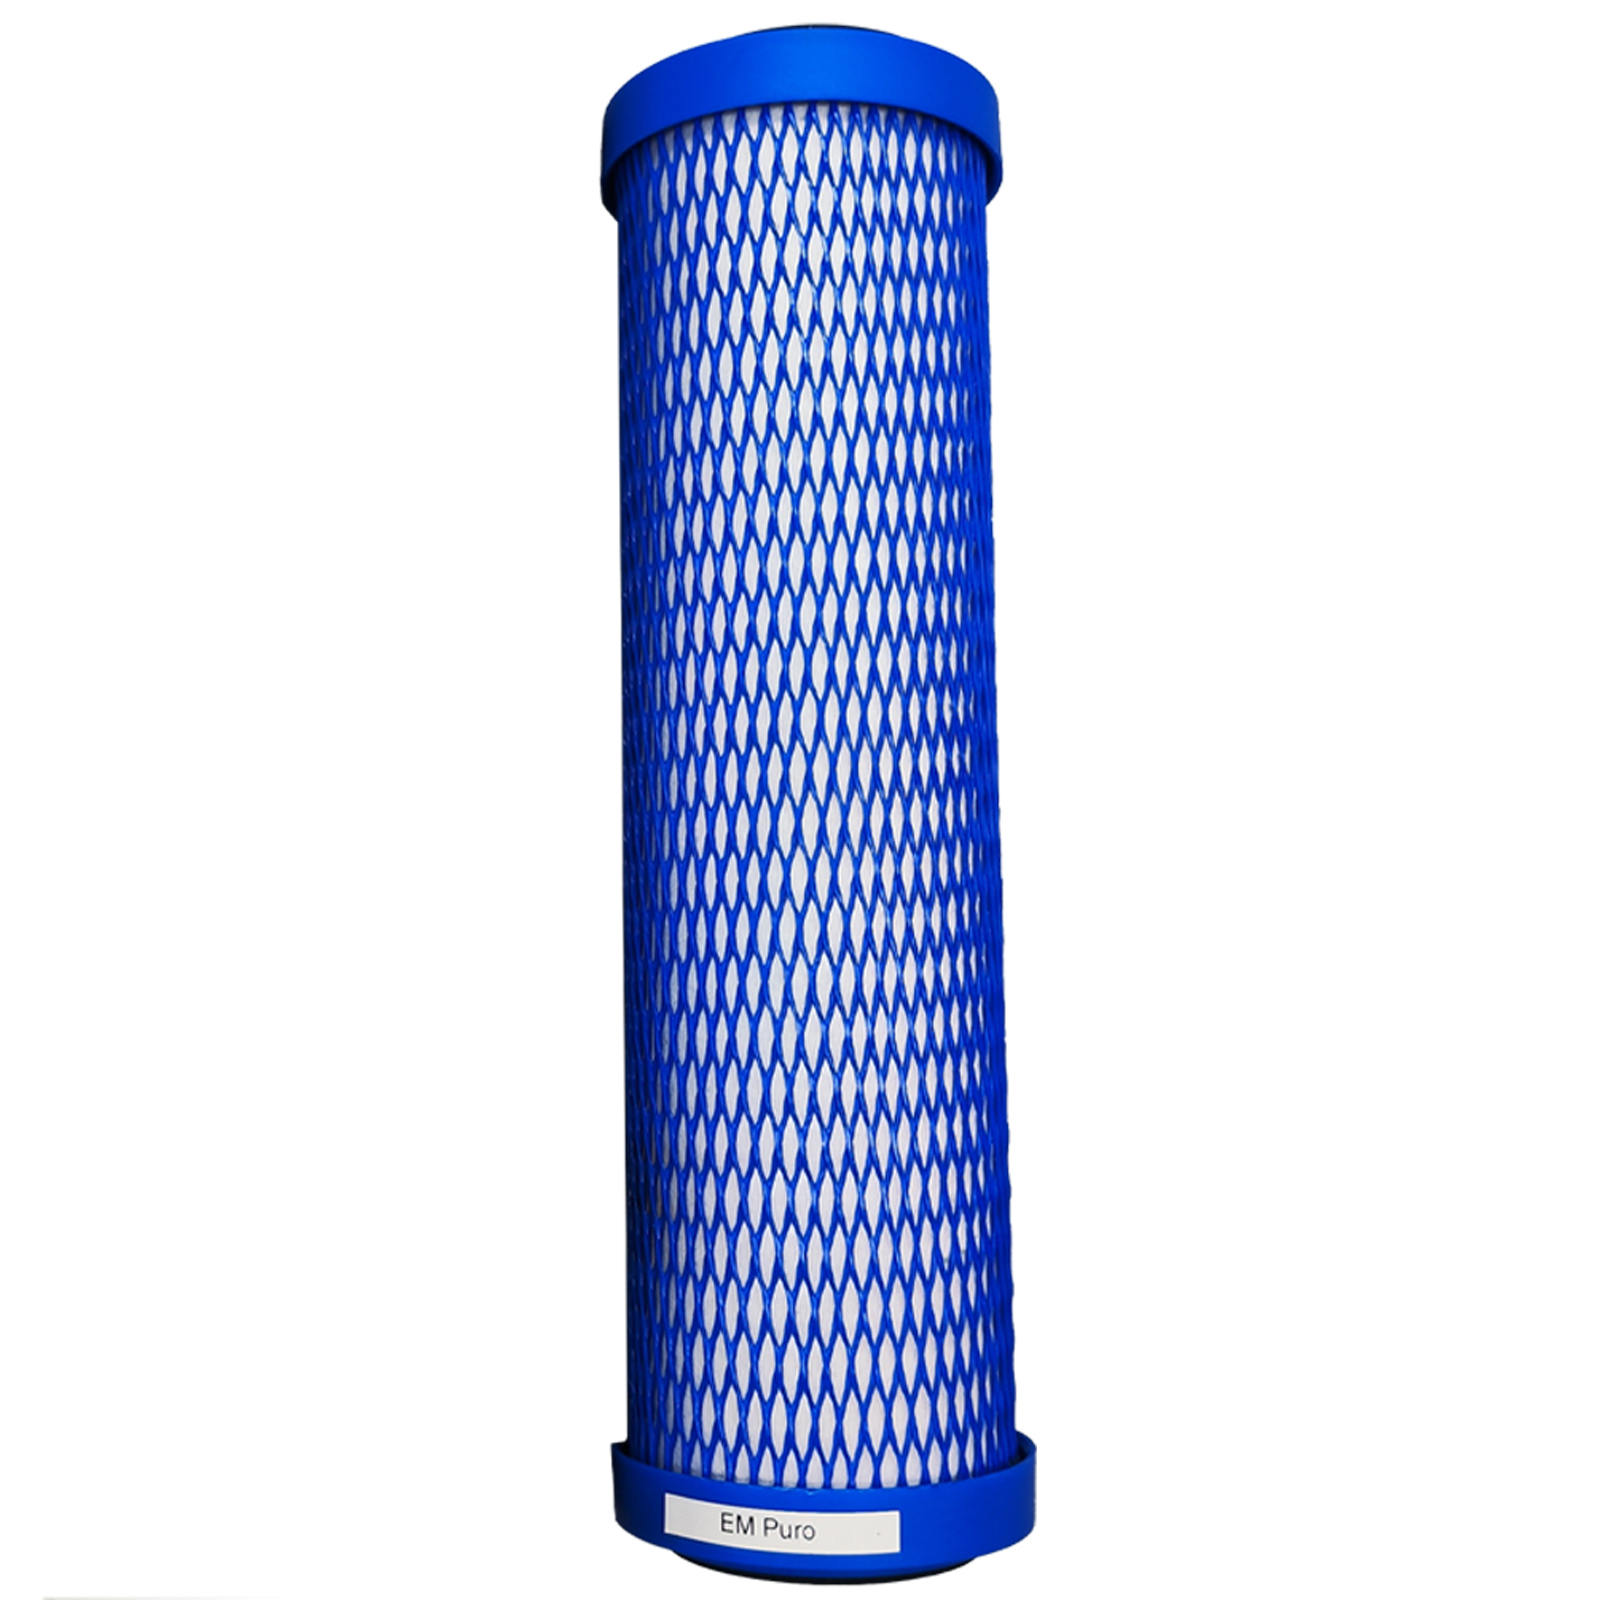 Waterfilter cartridge EM Puro by CARBONIT®